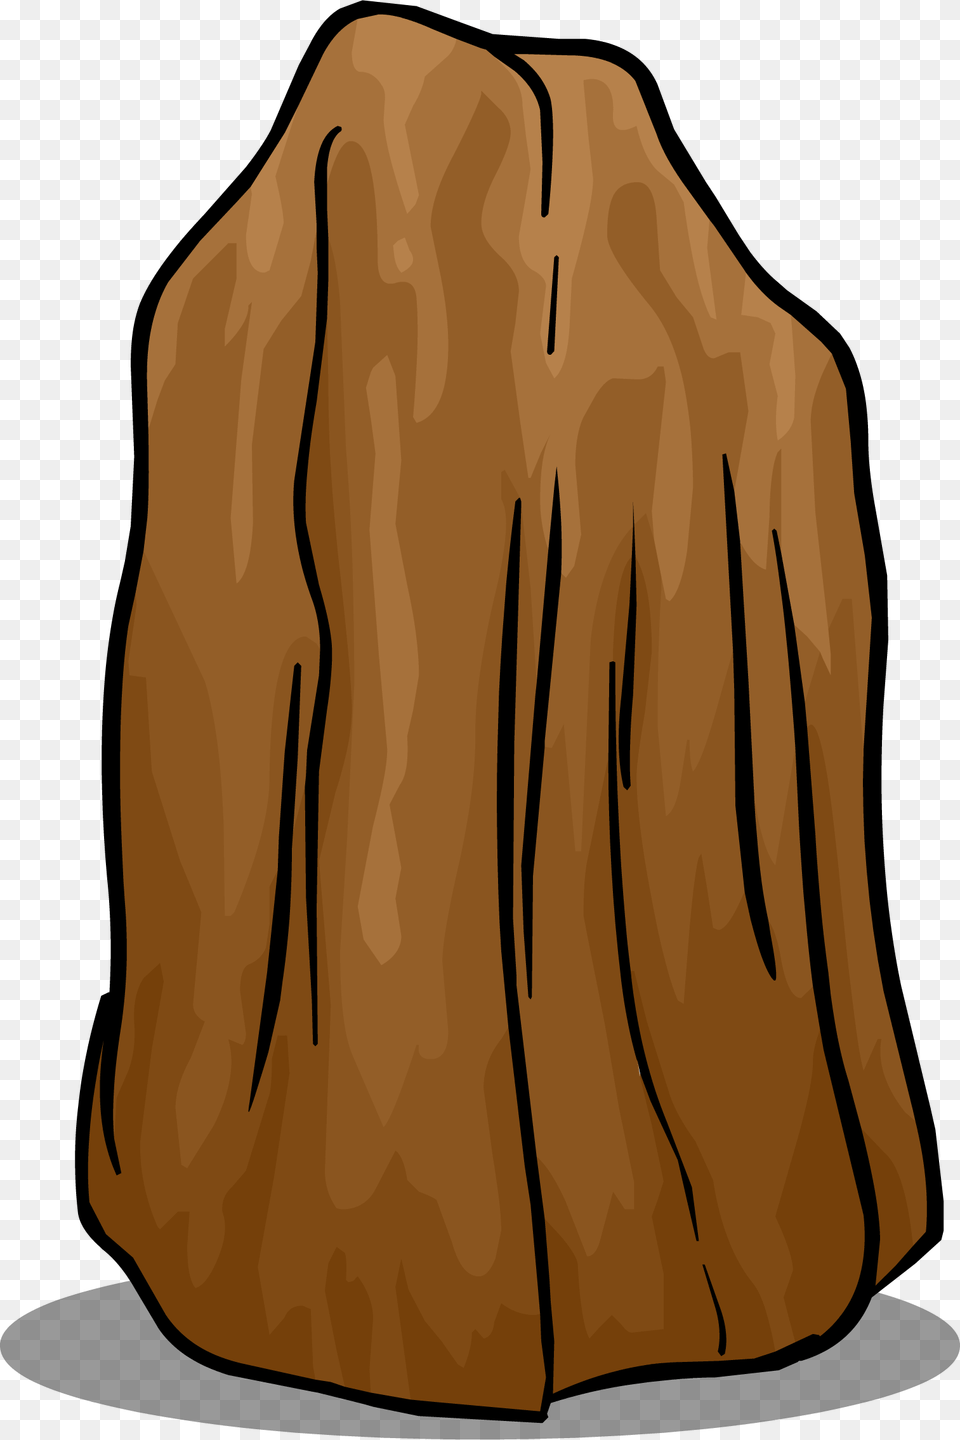 Tree Stump Chair Sprite, Plant, Food, Nut, Produce Free Png Download